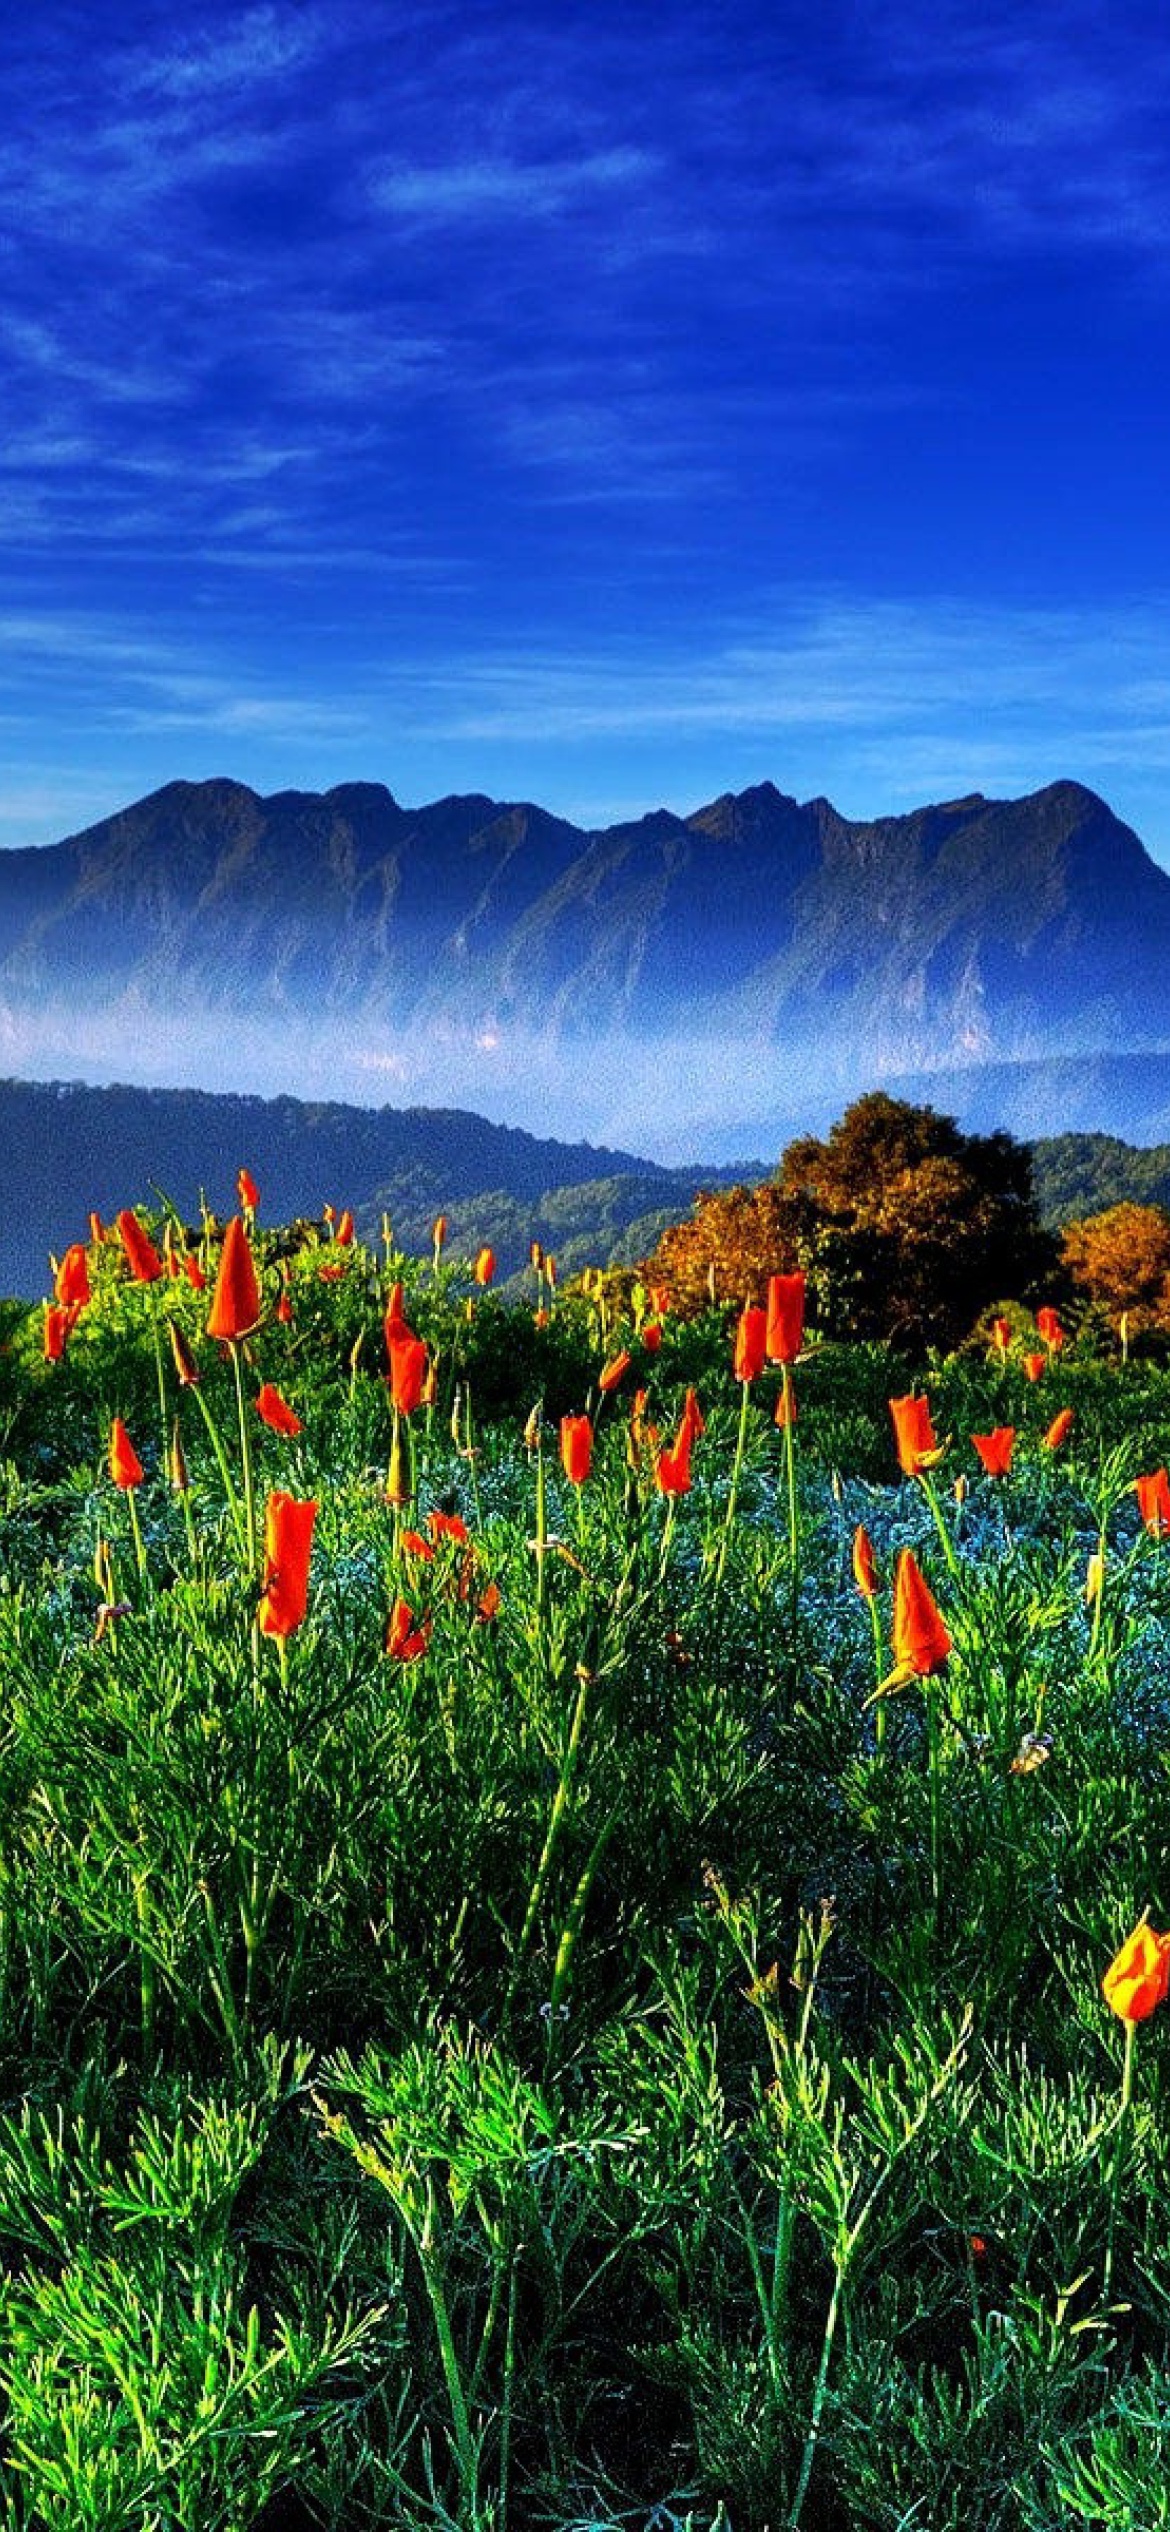 Spring has come to the mountains Thailand Chiang Dao screenshot #1 1170x2532